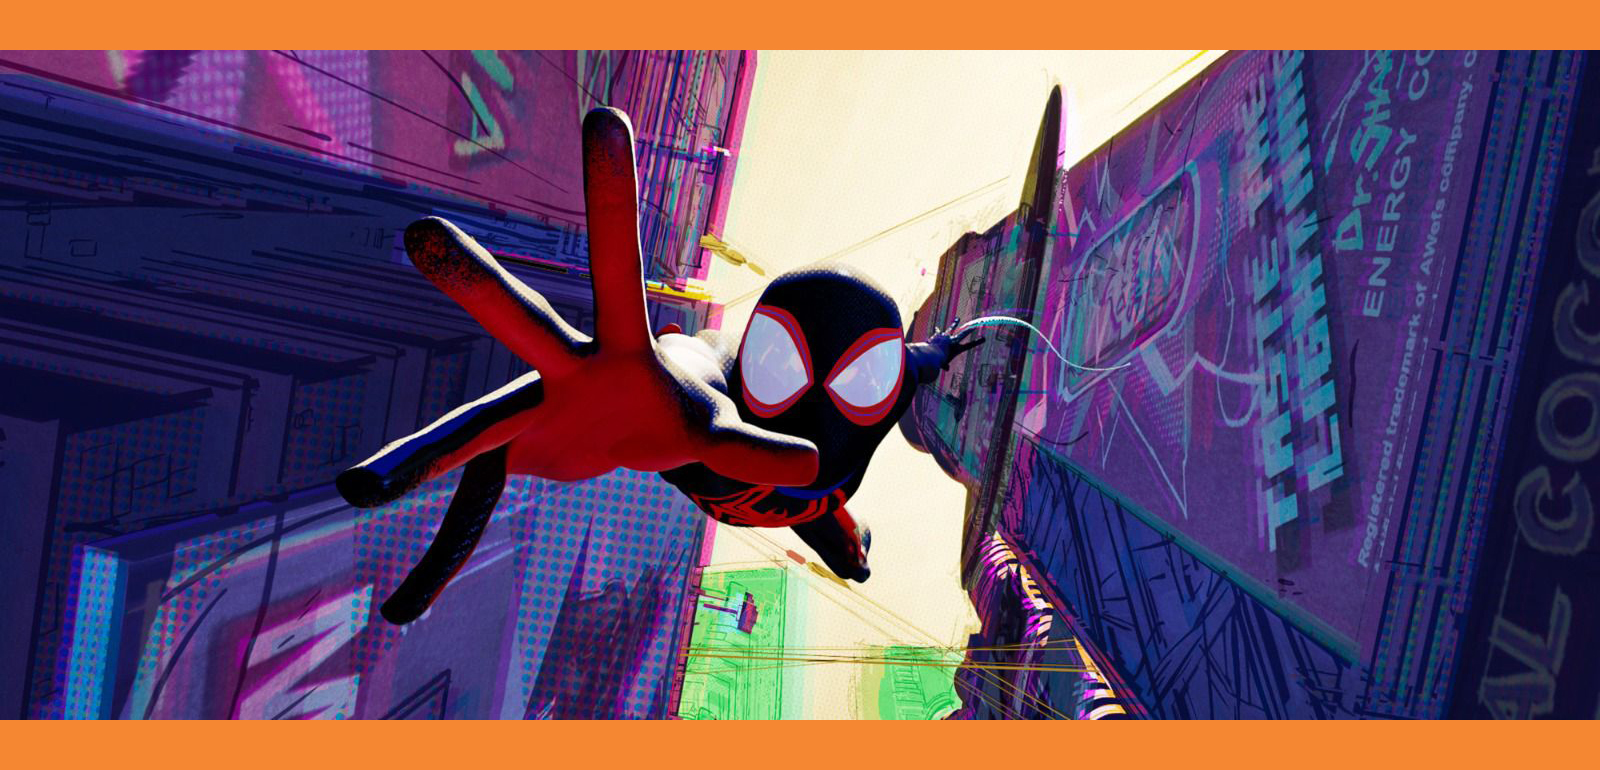 Spider-Man: Across the Spider-Verse records the biggest opening for an animated film in India